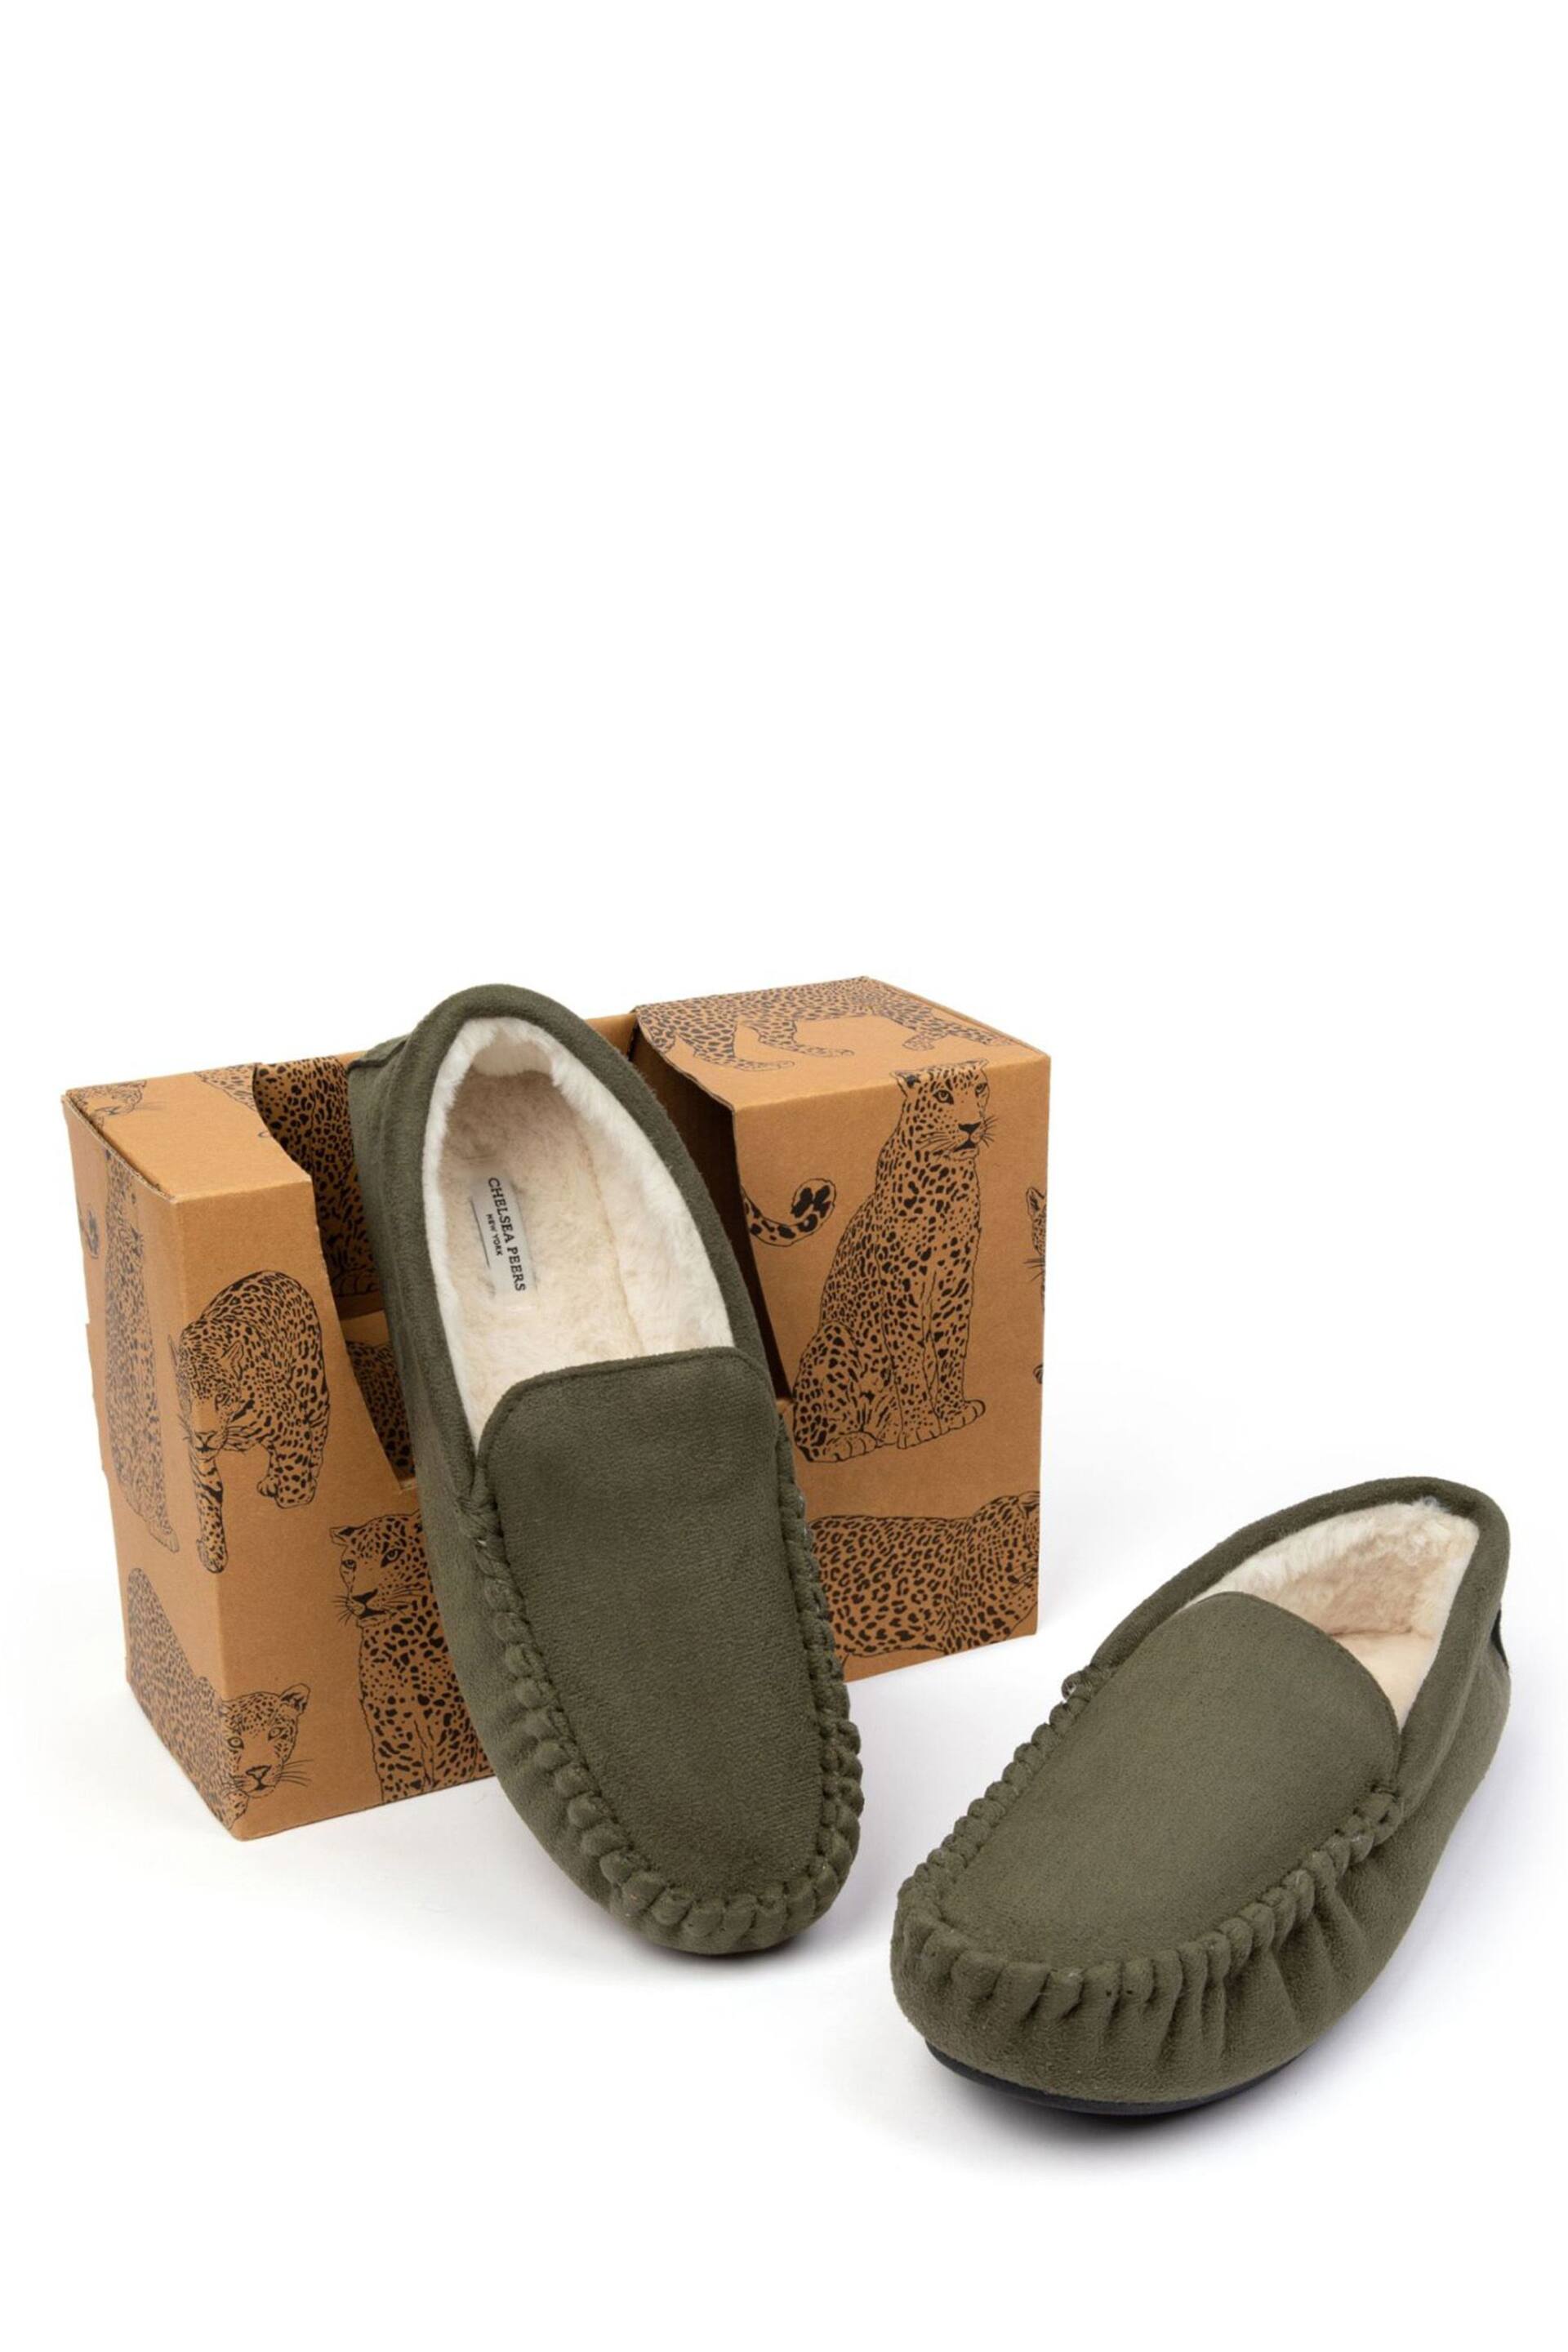 Chelsea Peers Green Suedette Moccasin Slippers - Men's - Image 3 of 4